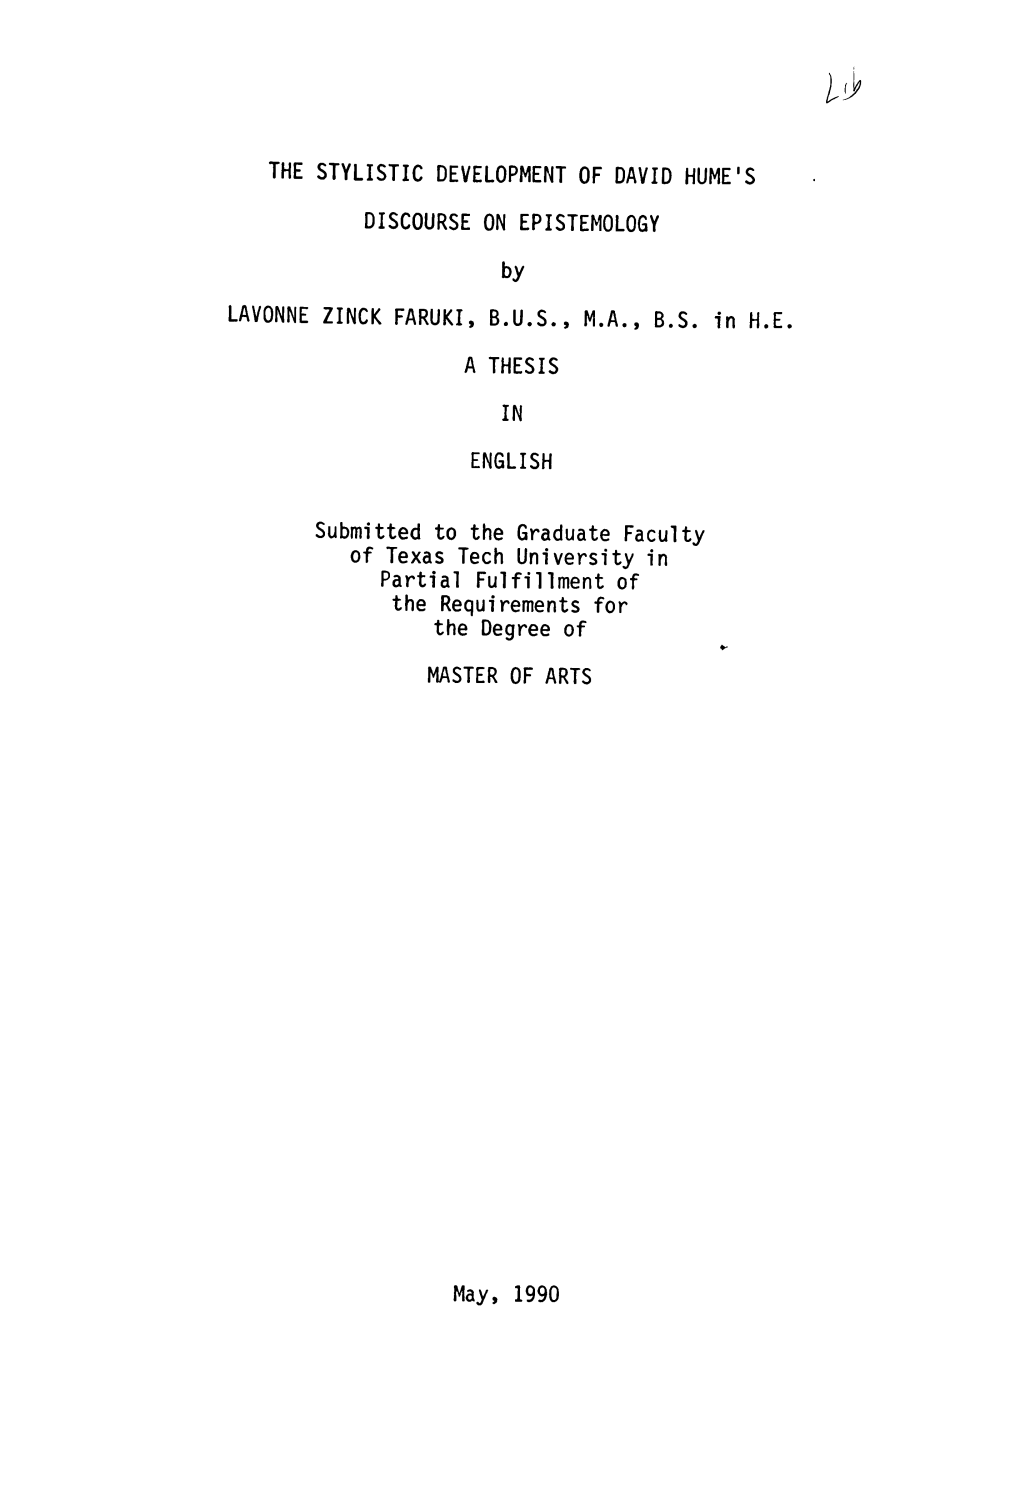 THE STYLISTIC DEVELOPMENT of DAVID HUME's DISCOURSE on EPISTEMOLOGY by LAVONNE ZINCK FARUKI, B.U.S., M.A., B.S. in H.E a THESIS in ENGLISH